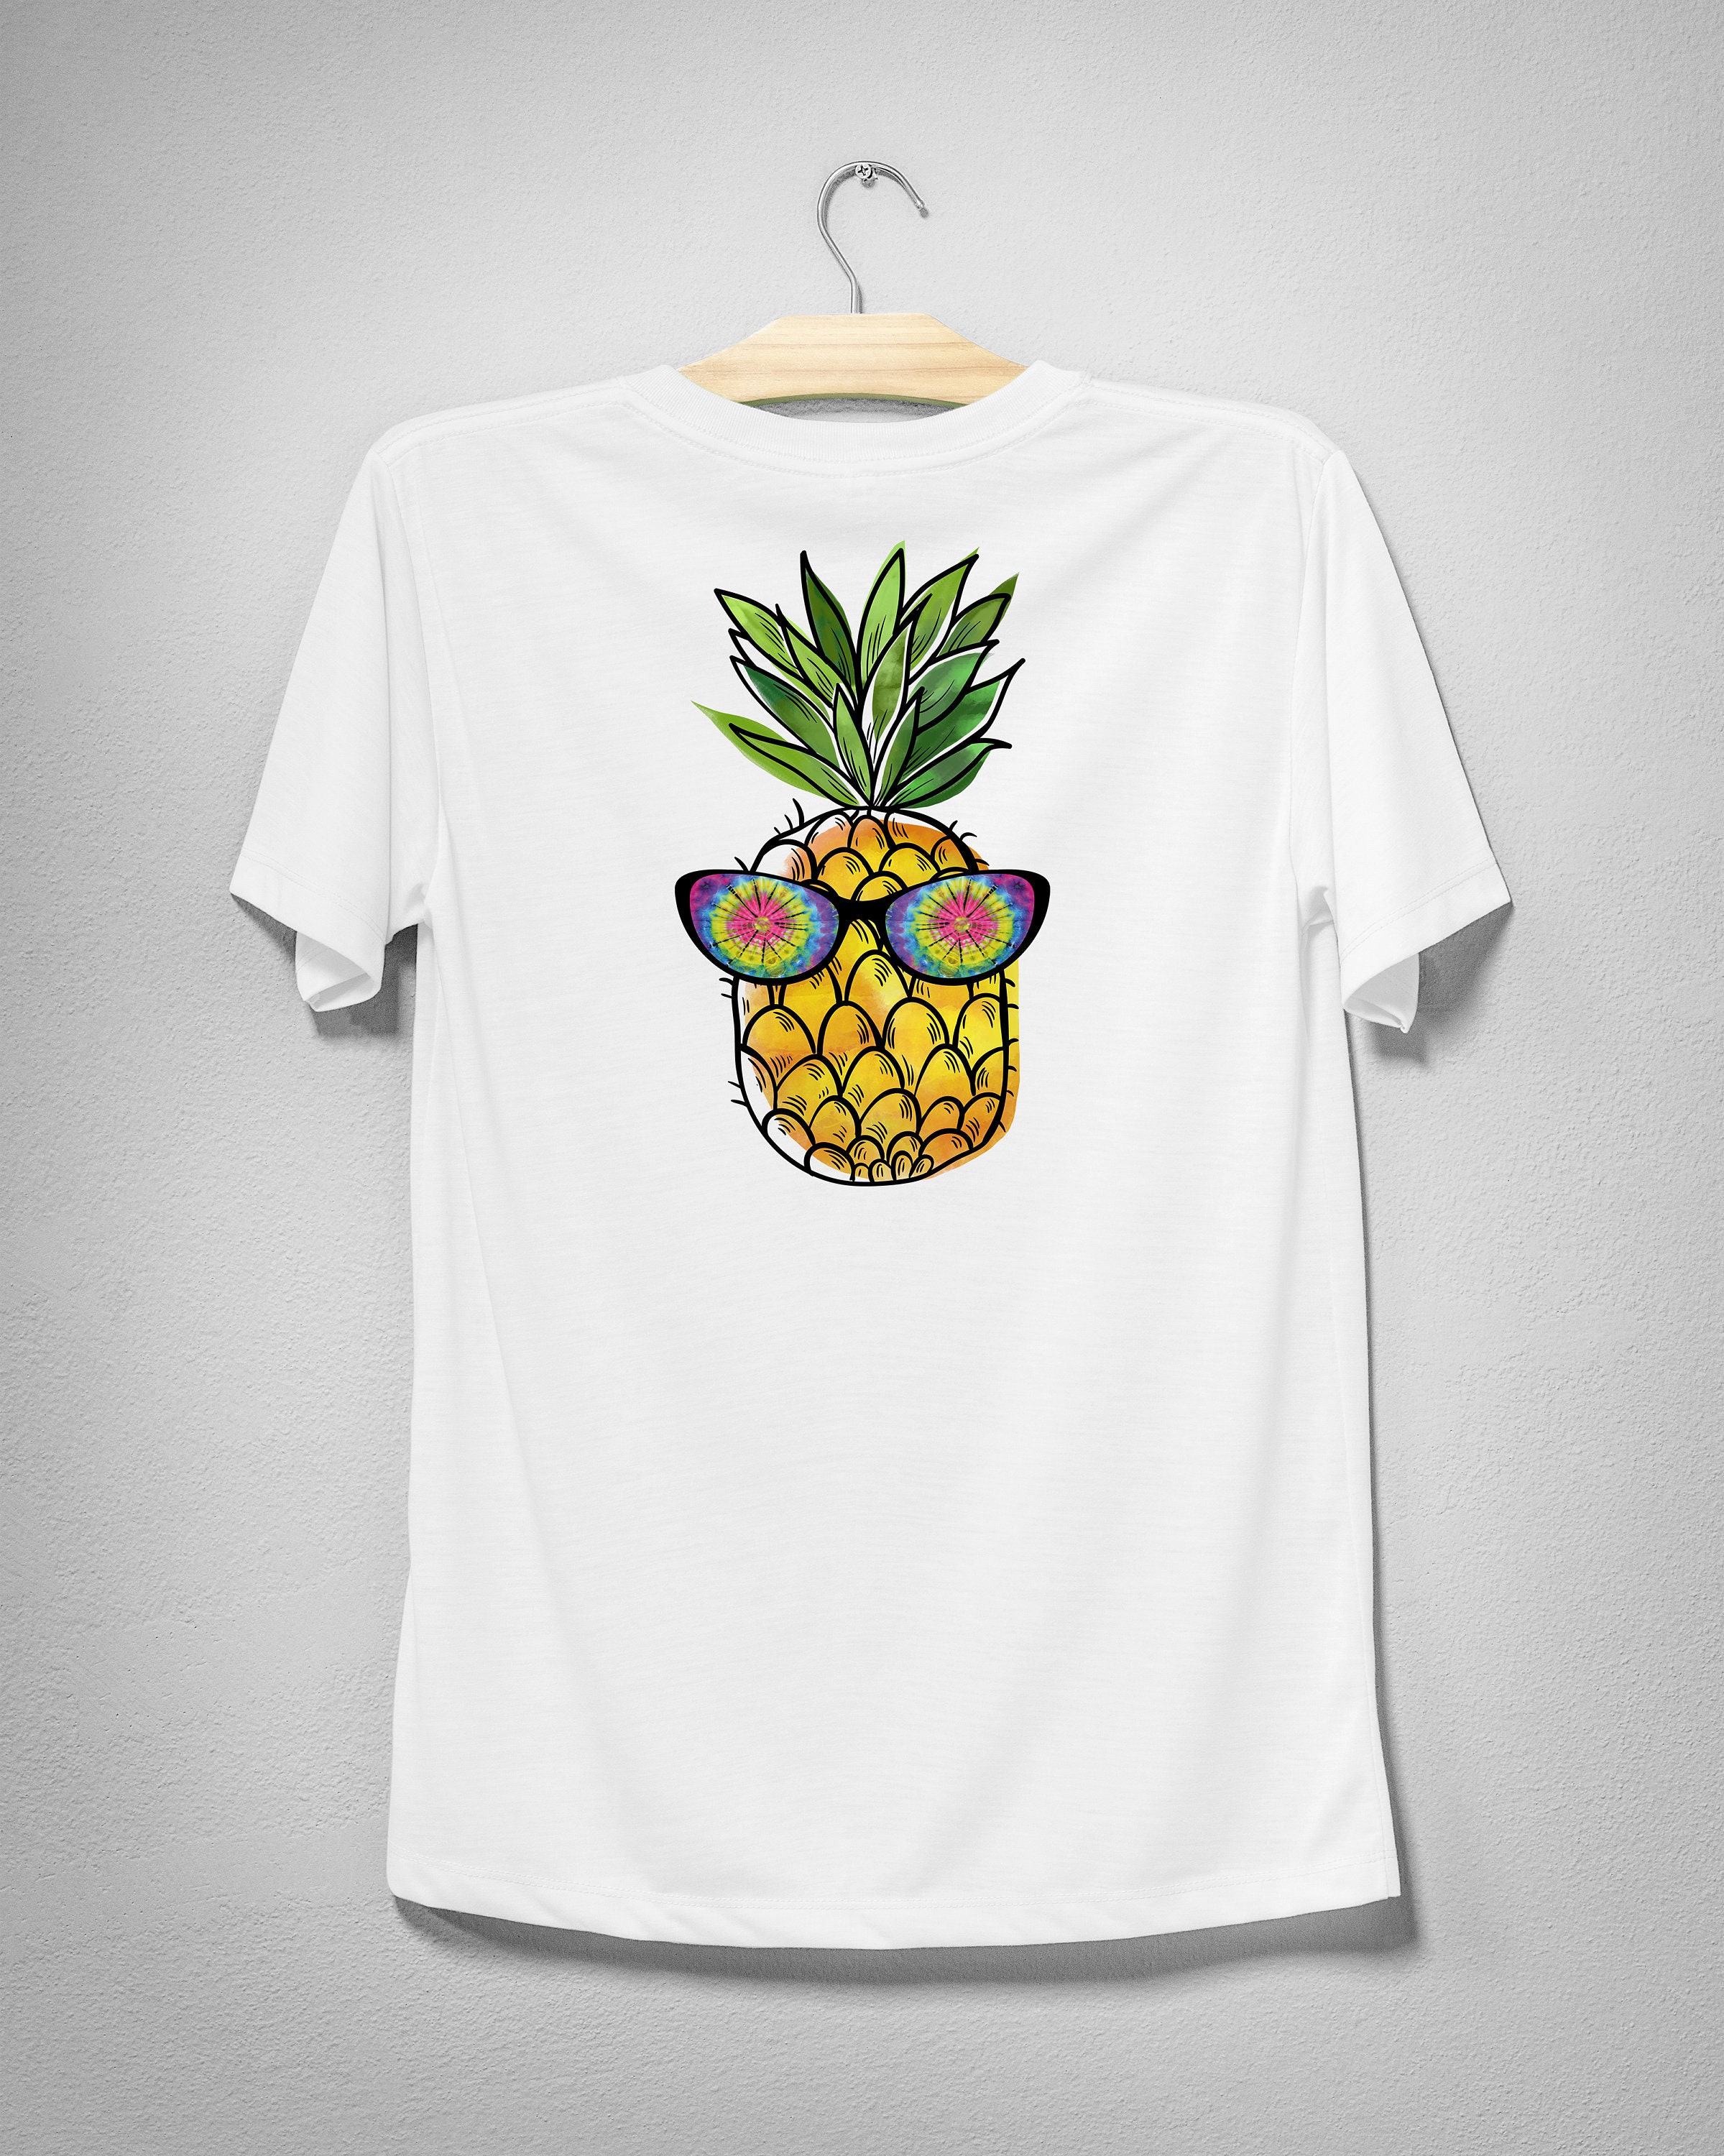 Pineapple sublimation designs downloadsPineapple with | Etsy